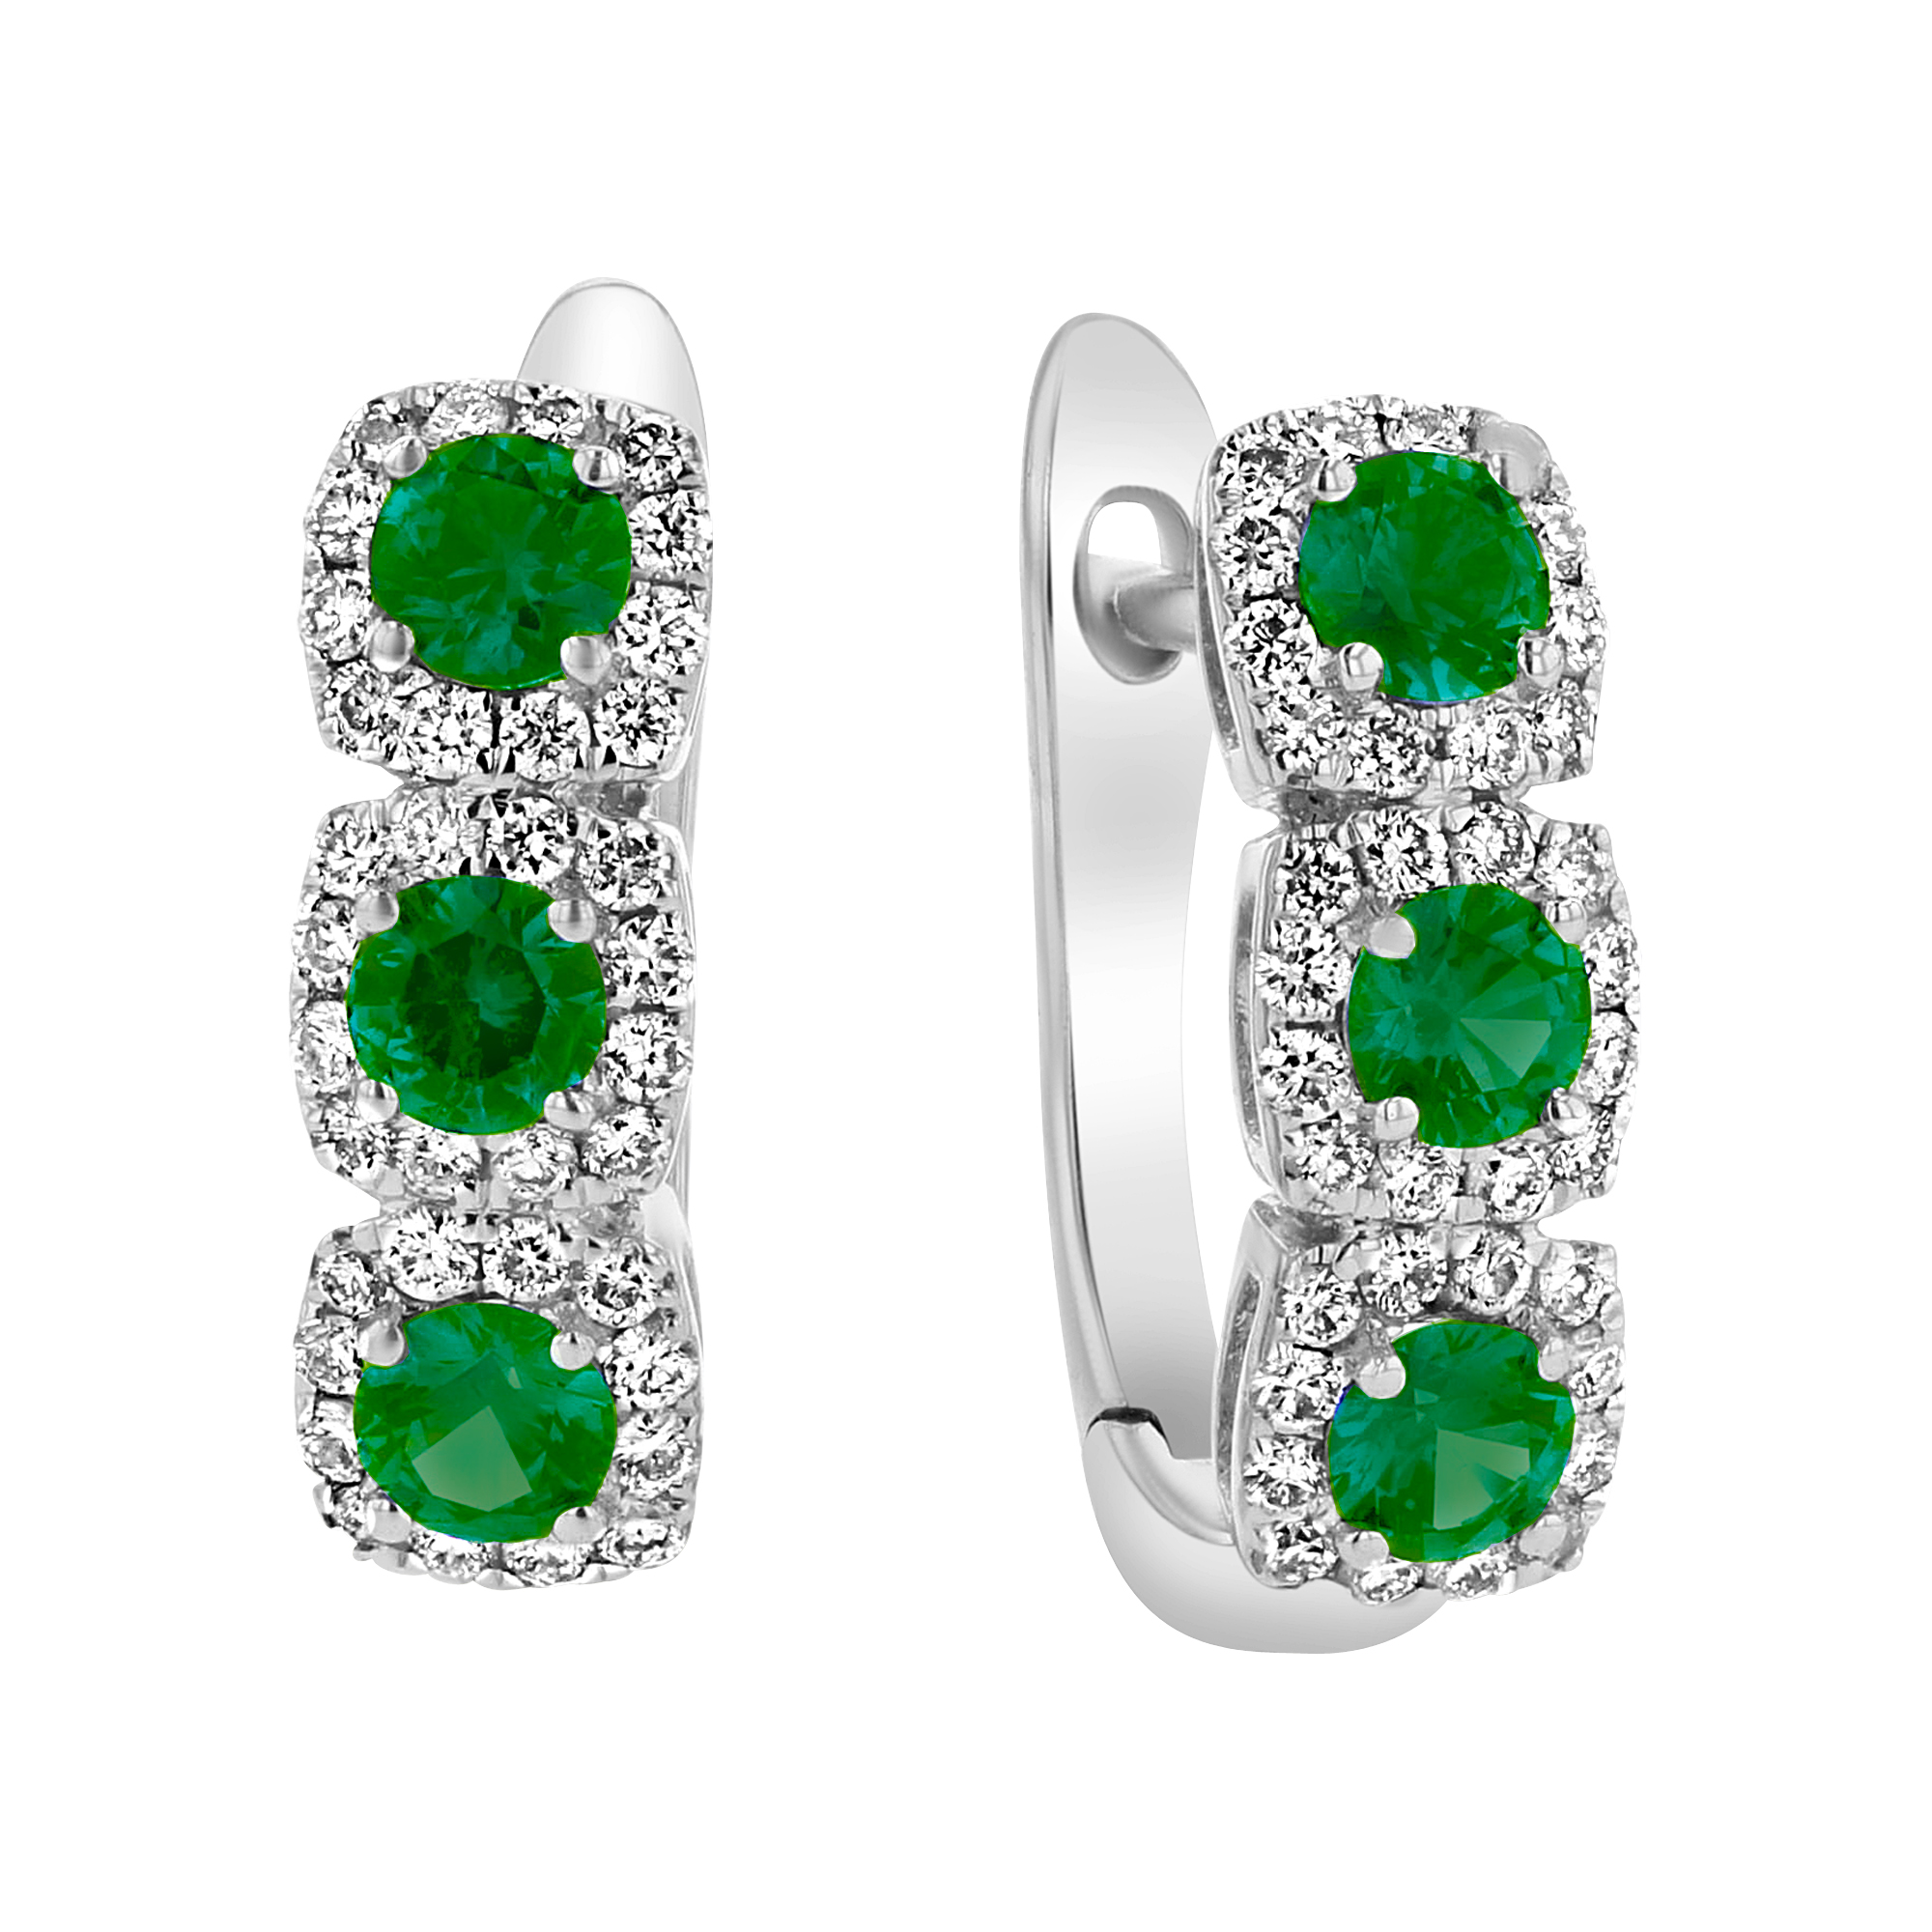 View 0.77ctw Diamond and Emerald Hoop Earrings in 18k White Gold